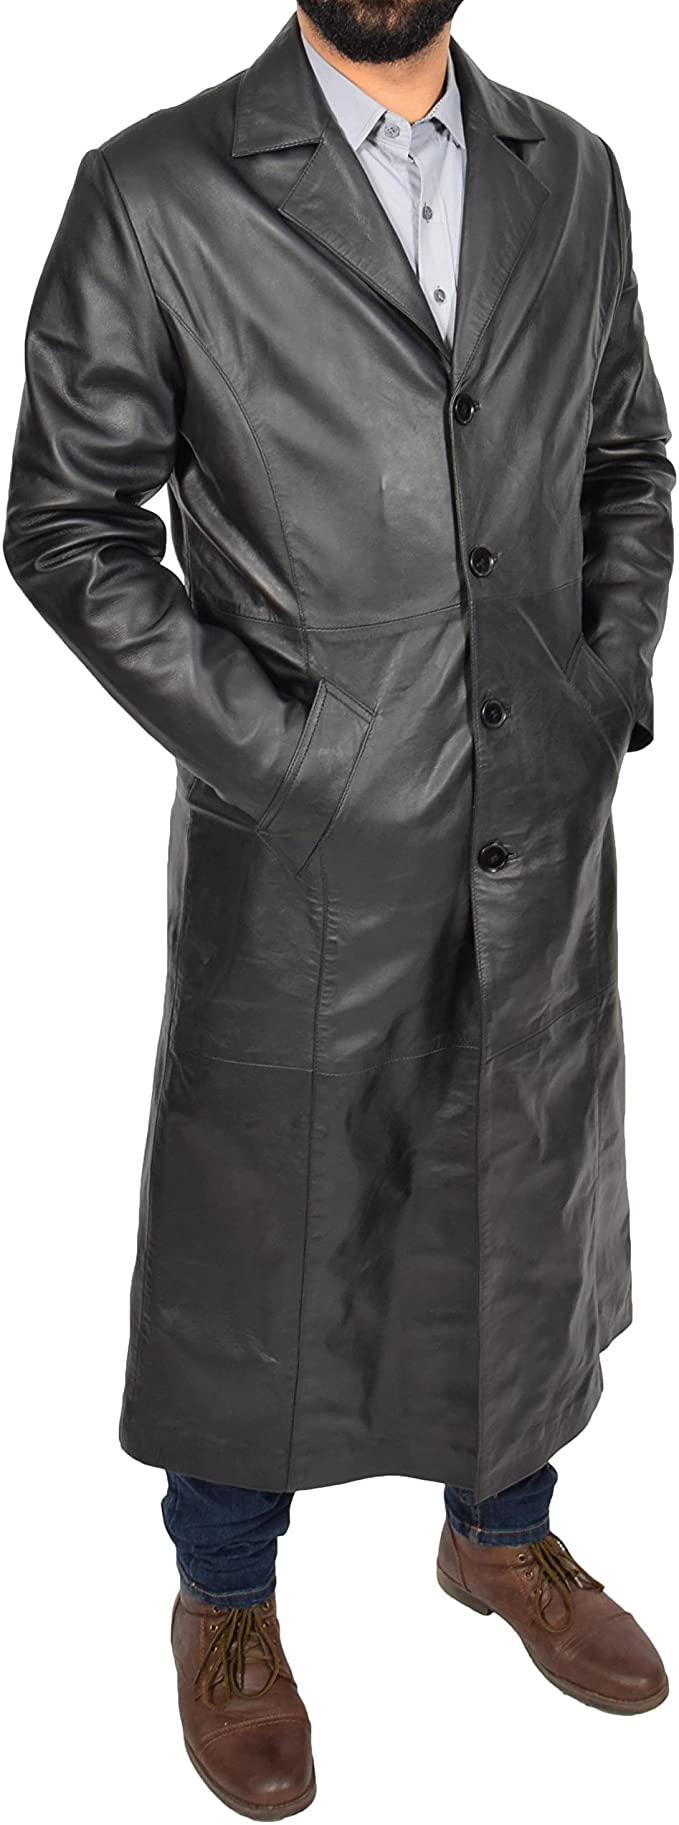 A1 FASHION GOODS Mens Long Leather Coat Full Length Black Leather Trench Mac Crombie Overcoat - Blade